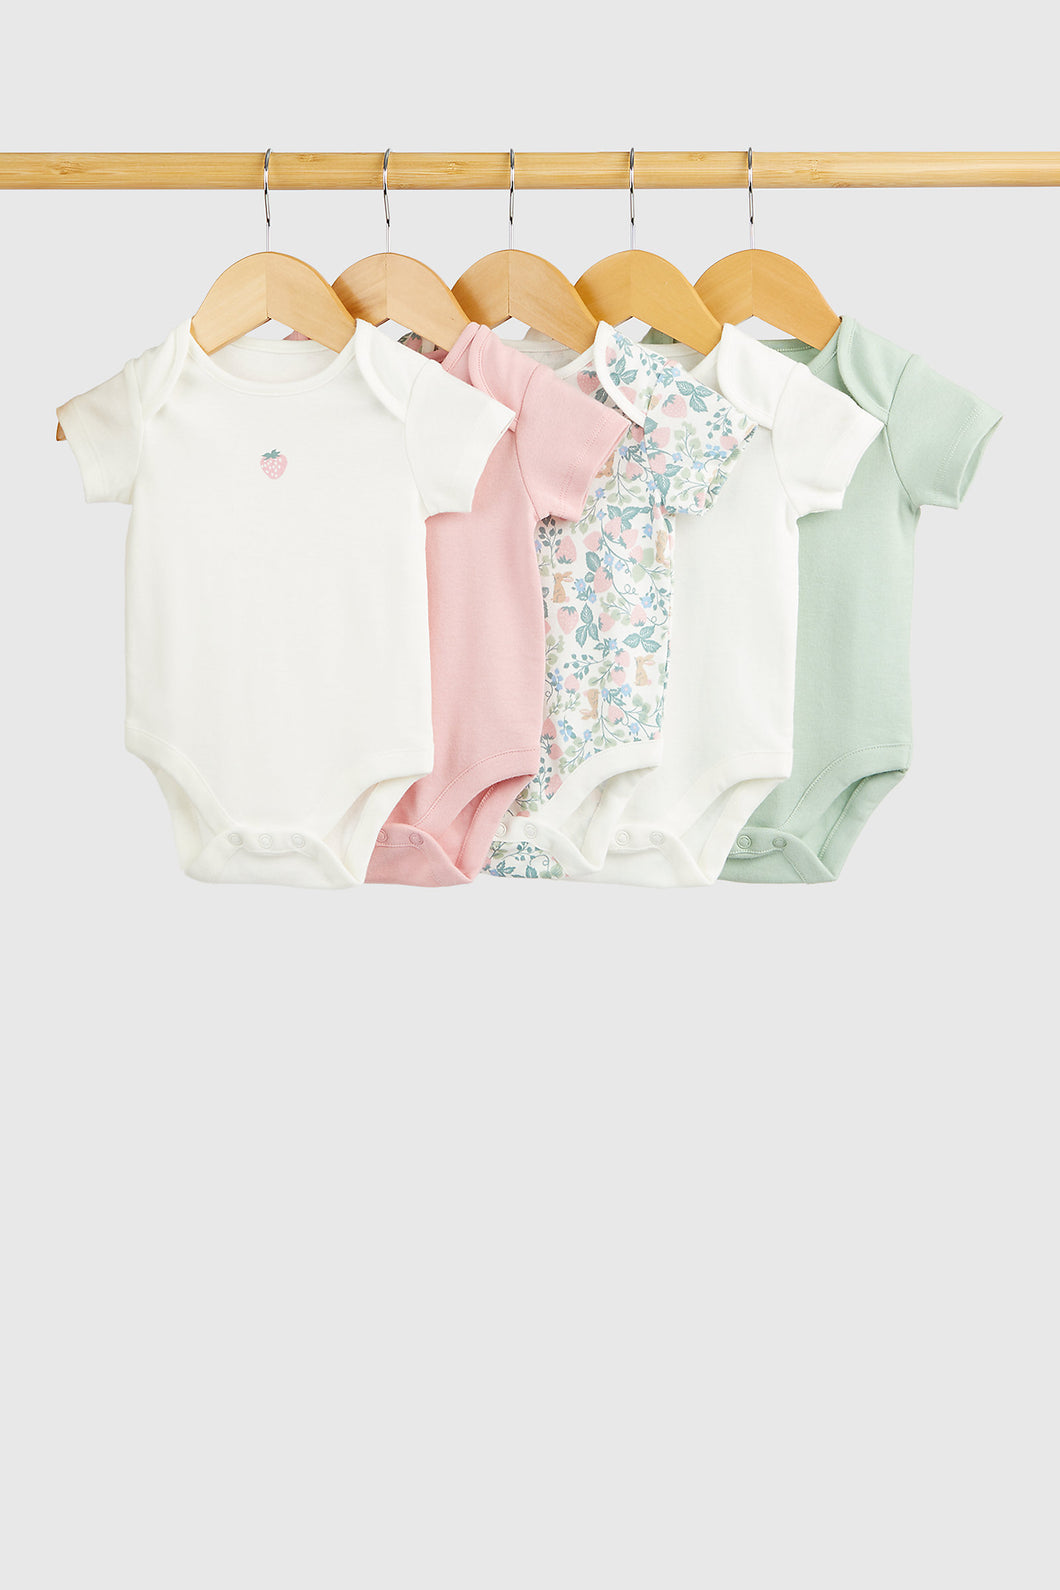 Mothercare Strawberry Short-Sleeved Bodysuits - 5 Pack